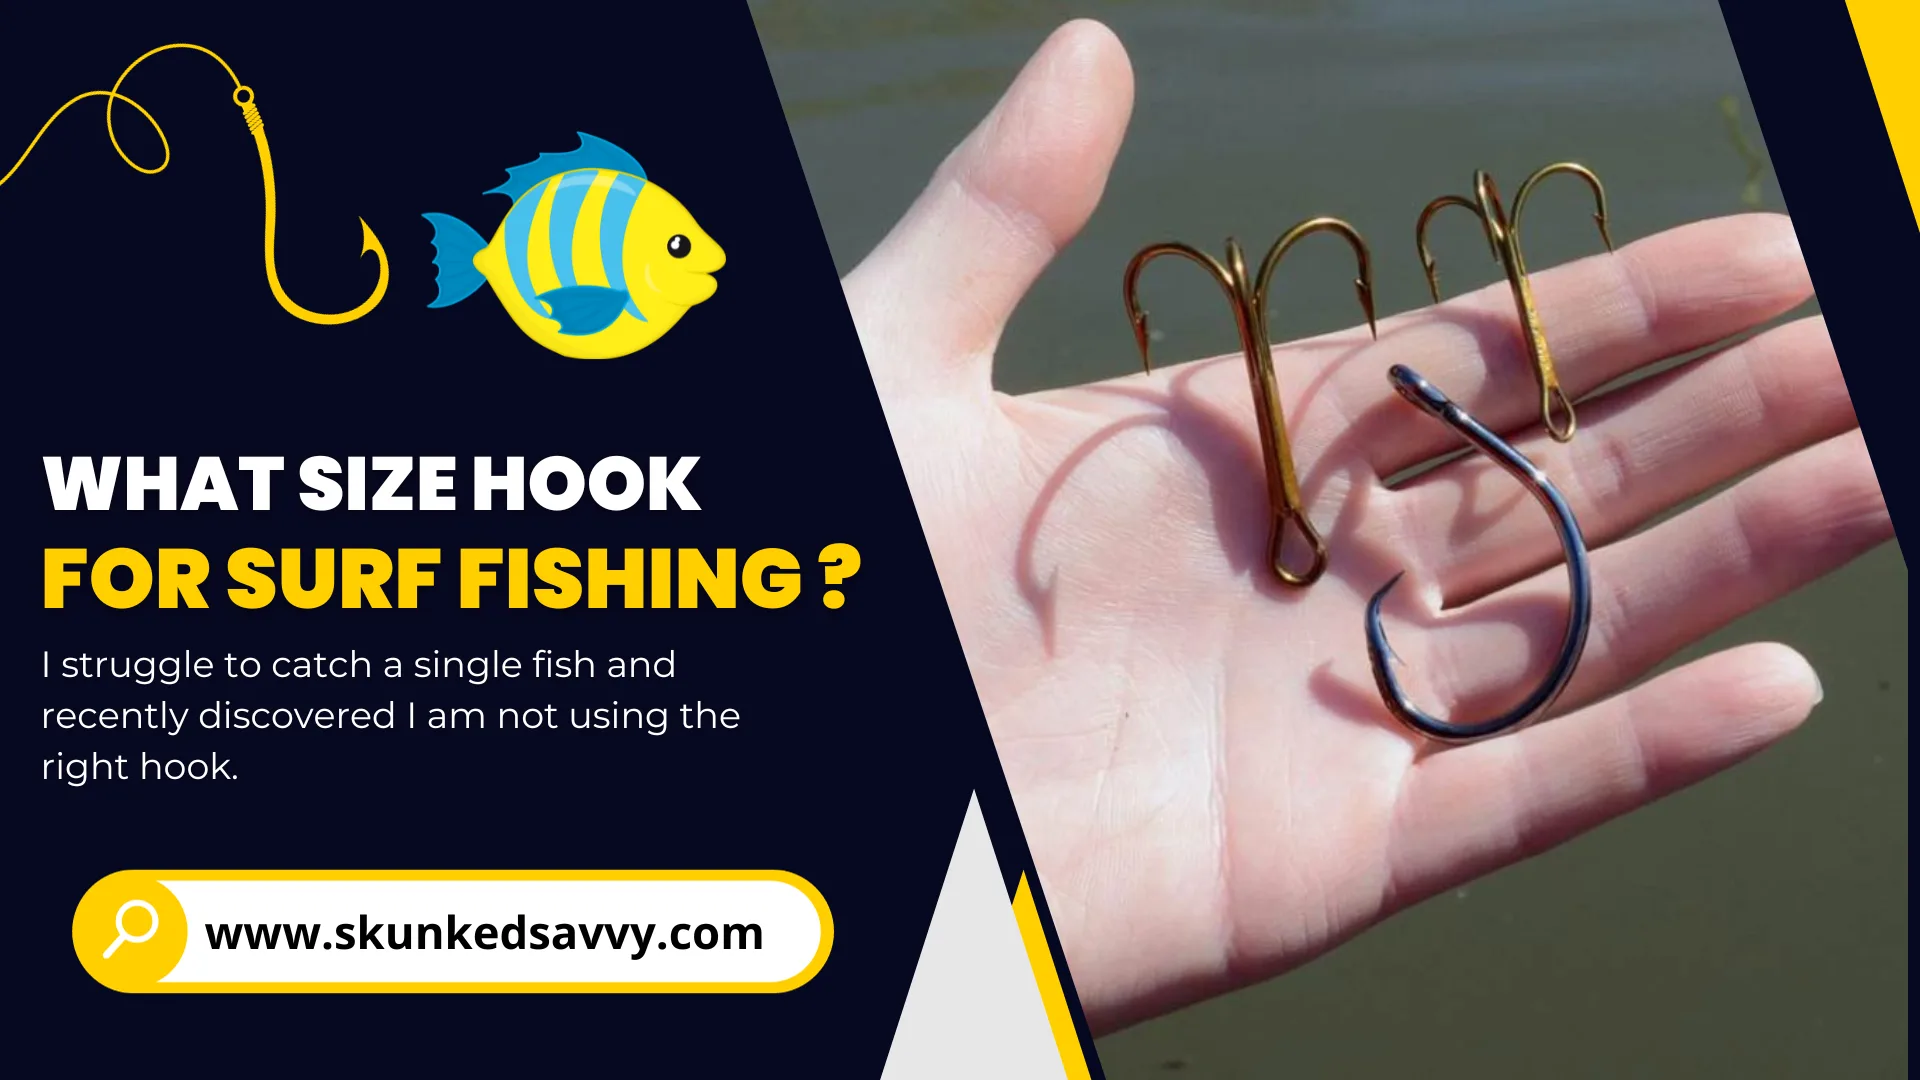 What Size Hook for Surf Fishing